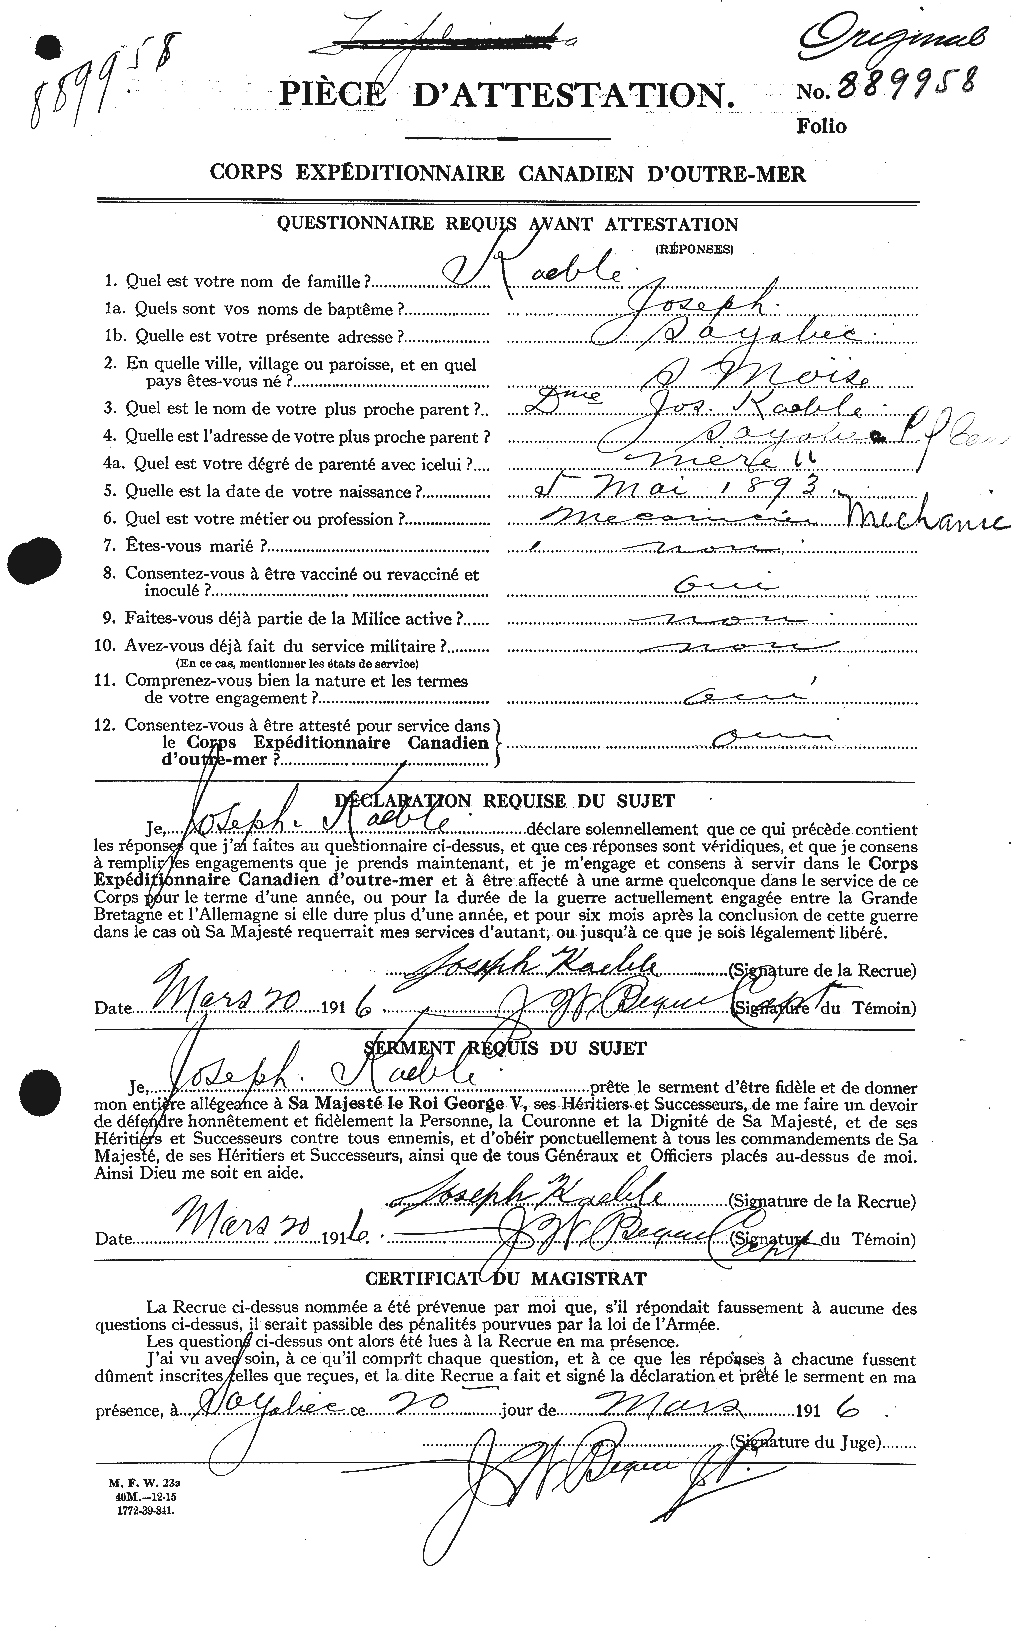 Personnel Records of the First World War - CEF 206294a